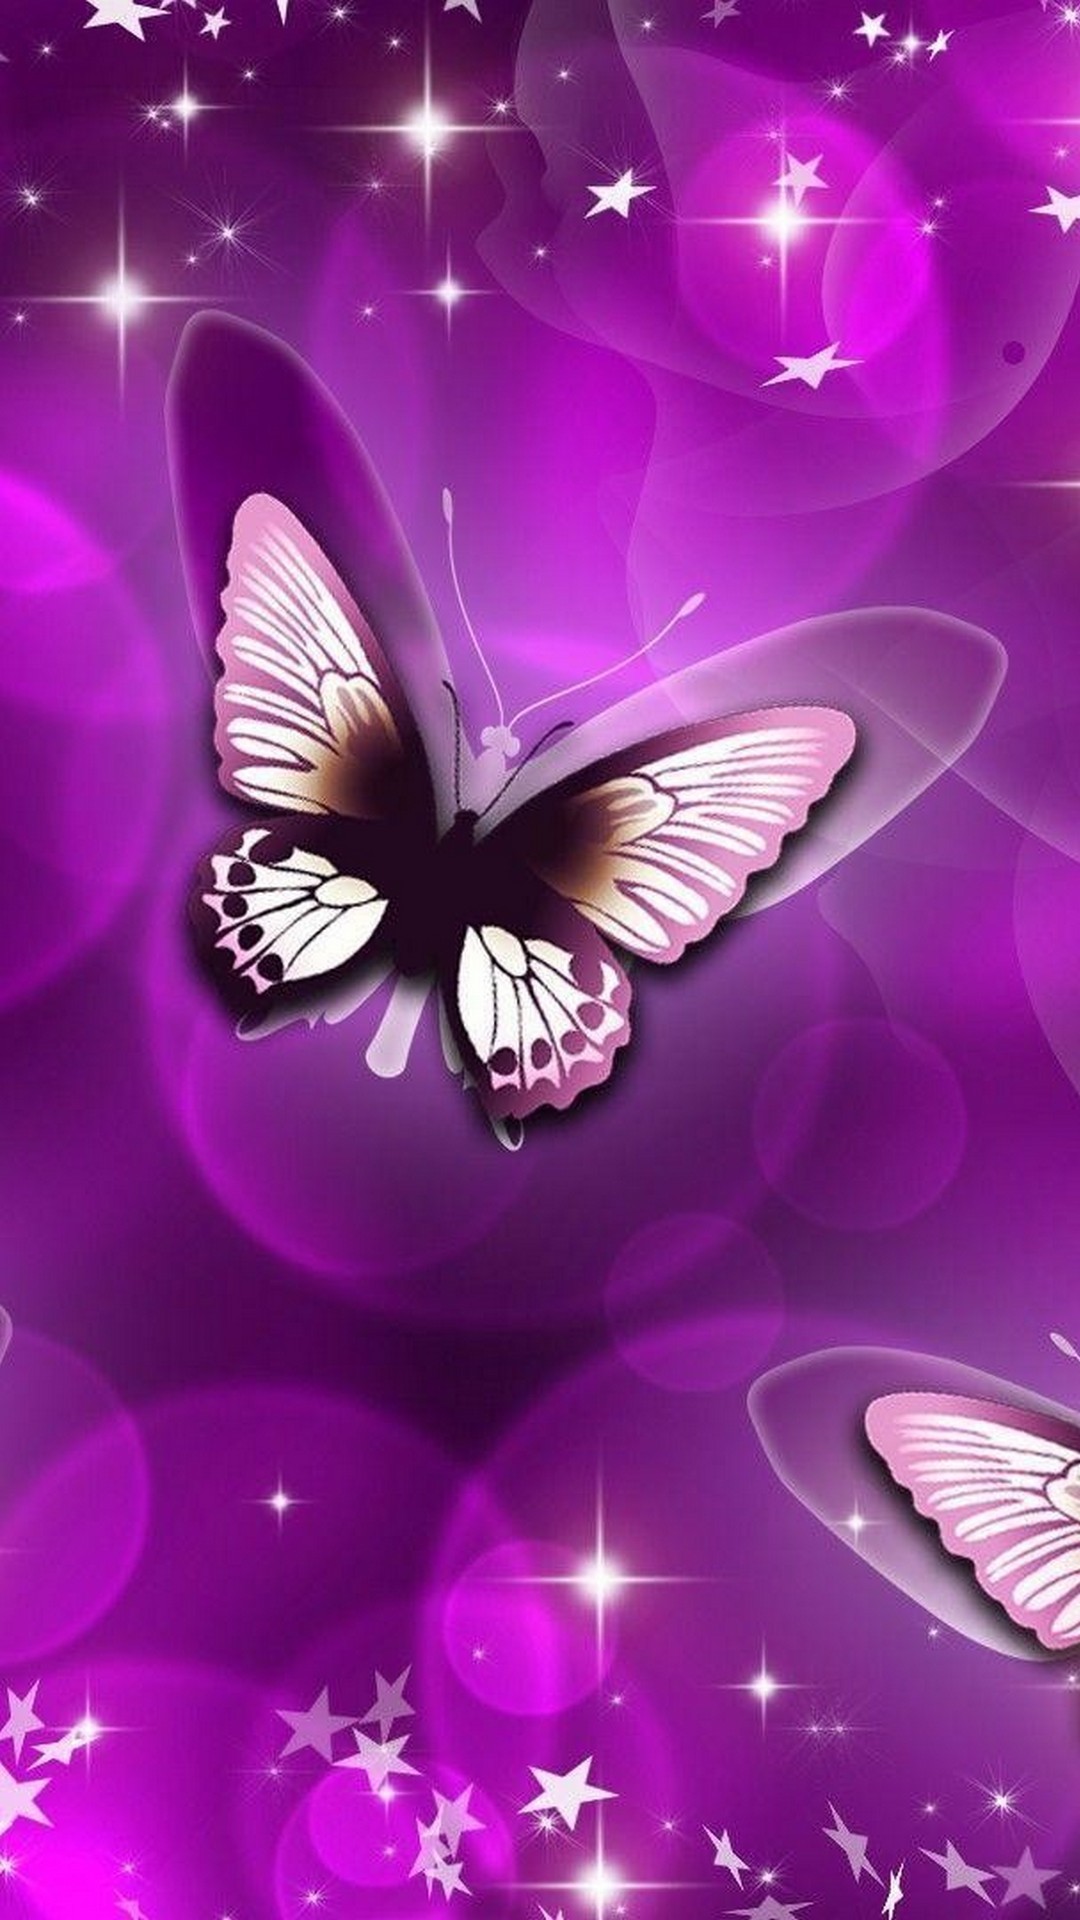 Wallpaper Android Purple Butterfly - 2021 Android Wallpapers